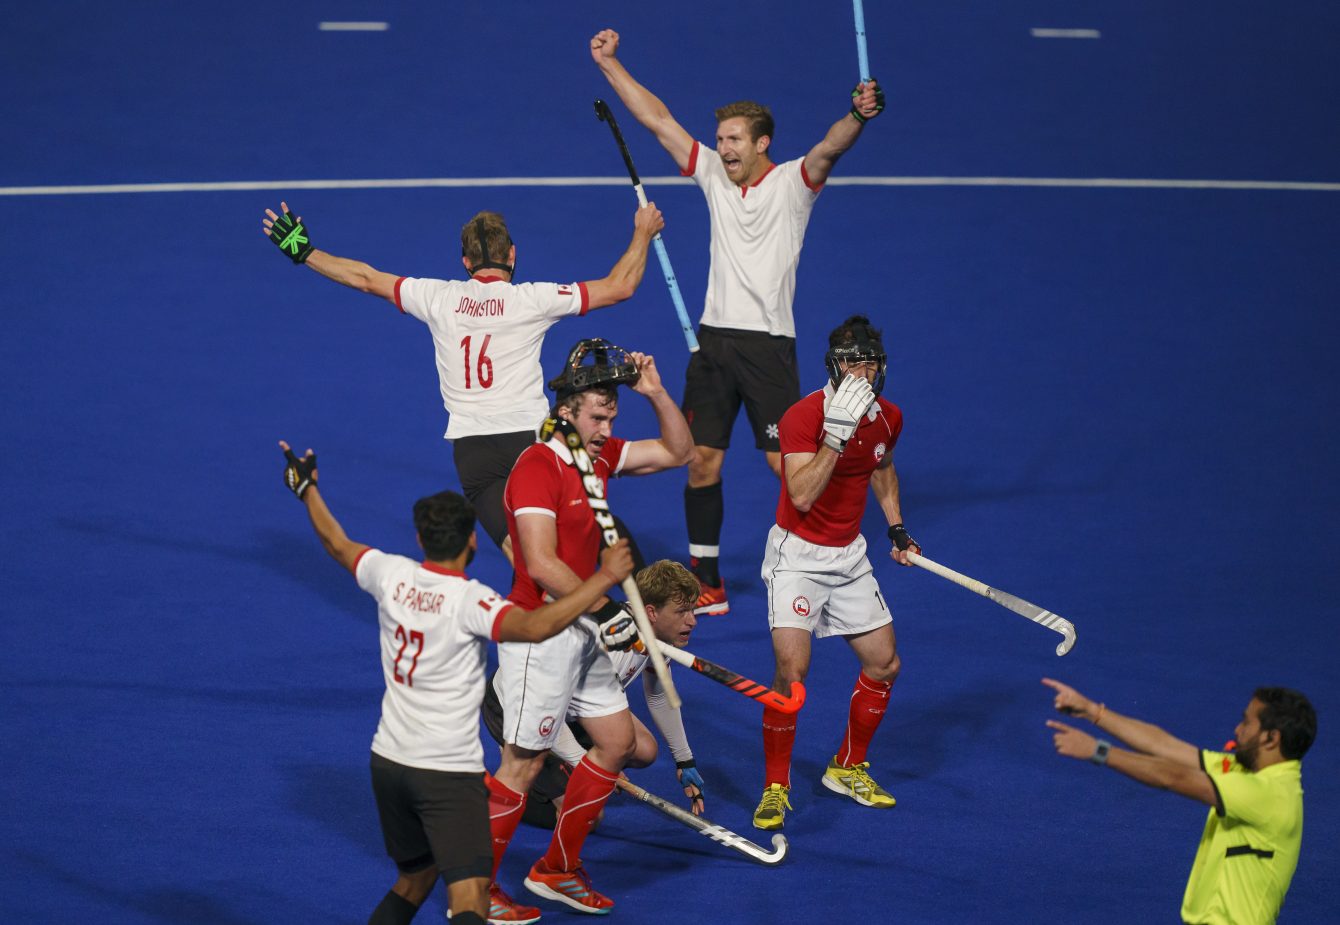 Men's Field Hockey celebrates advancing to the Lima 2019 gold medal final